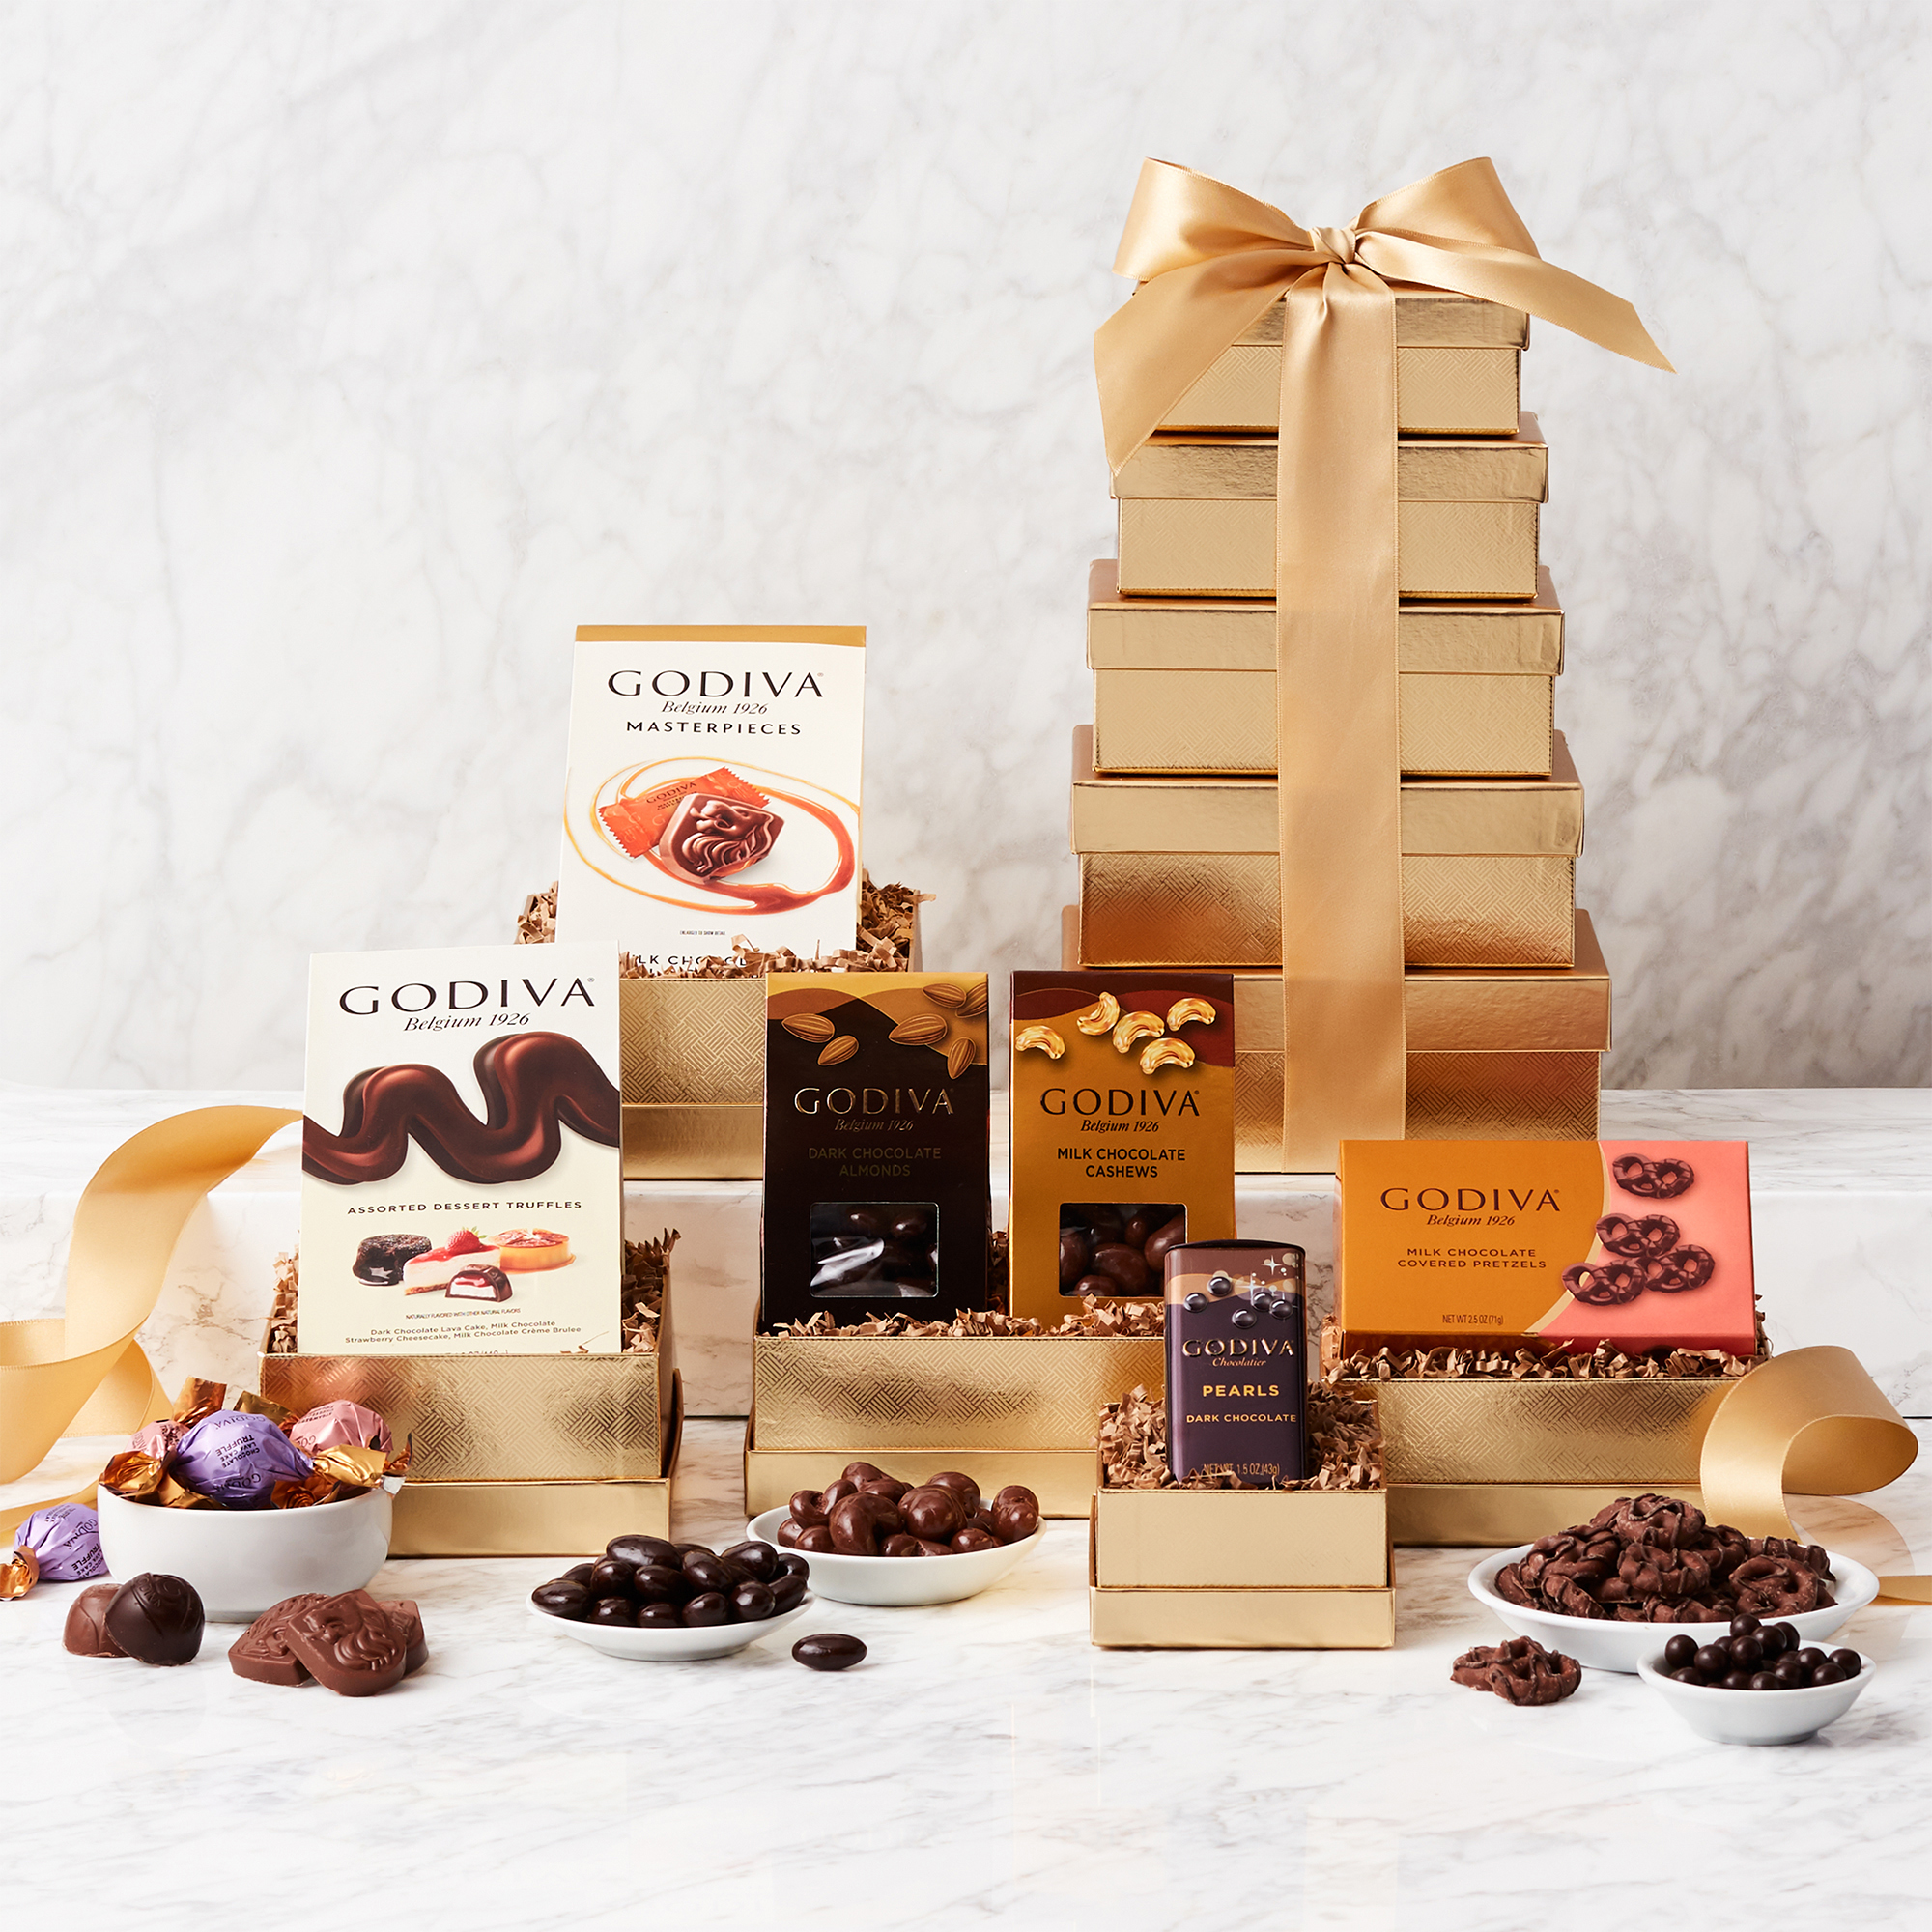 Godiva For Any Occasion Chocolate Gift Basket - image 1 of 1